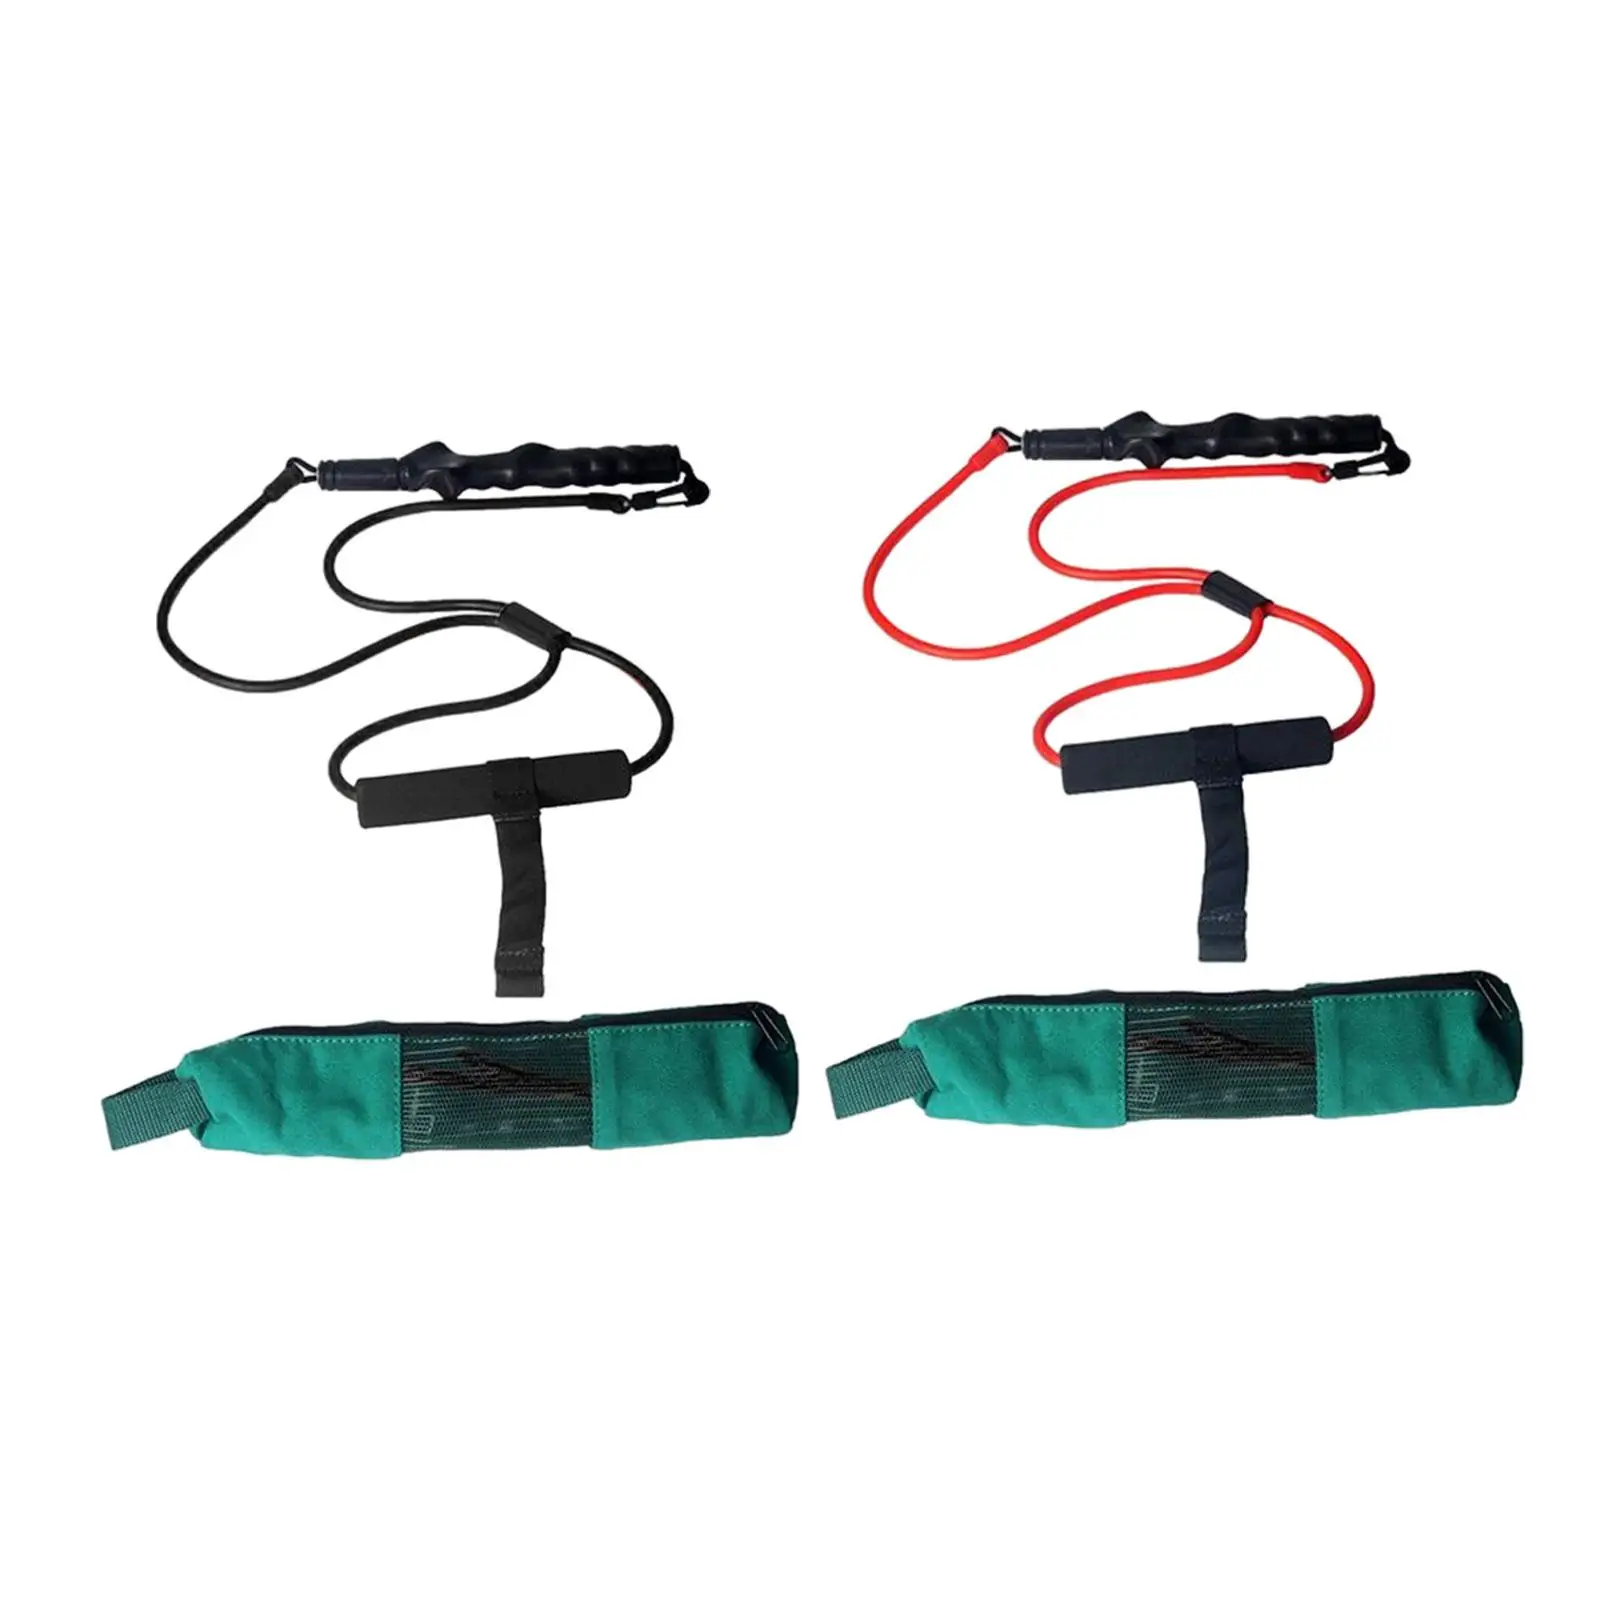 Golf Training Aid Portable to Improve Forearm Rotation Posture Corrector Workout Golf Swing Resistance Bands Golf Swing Trainer